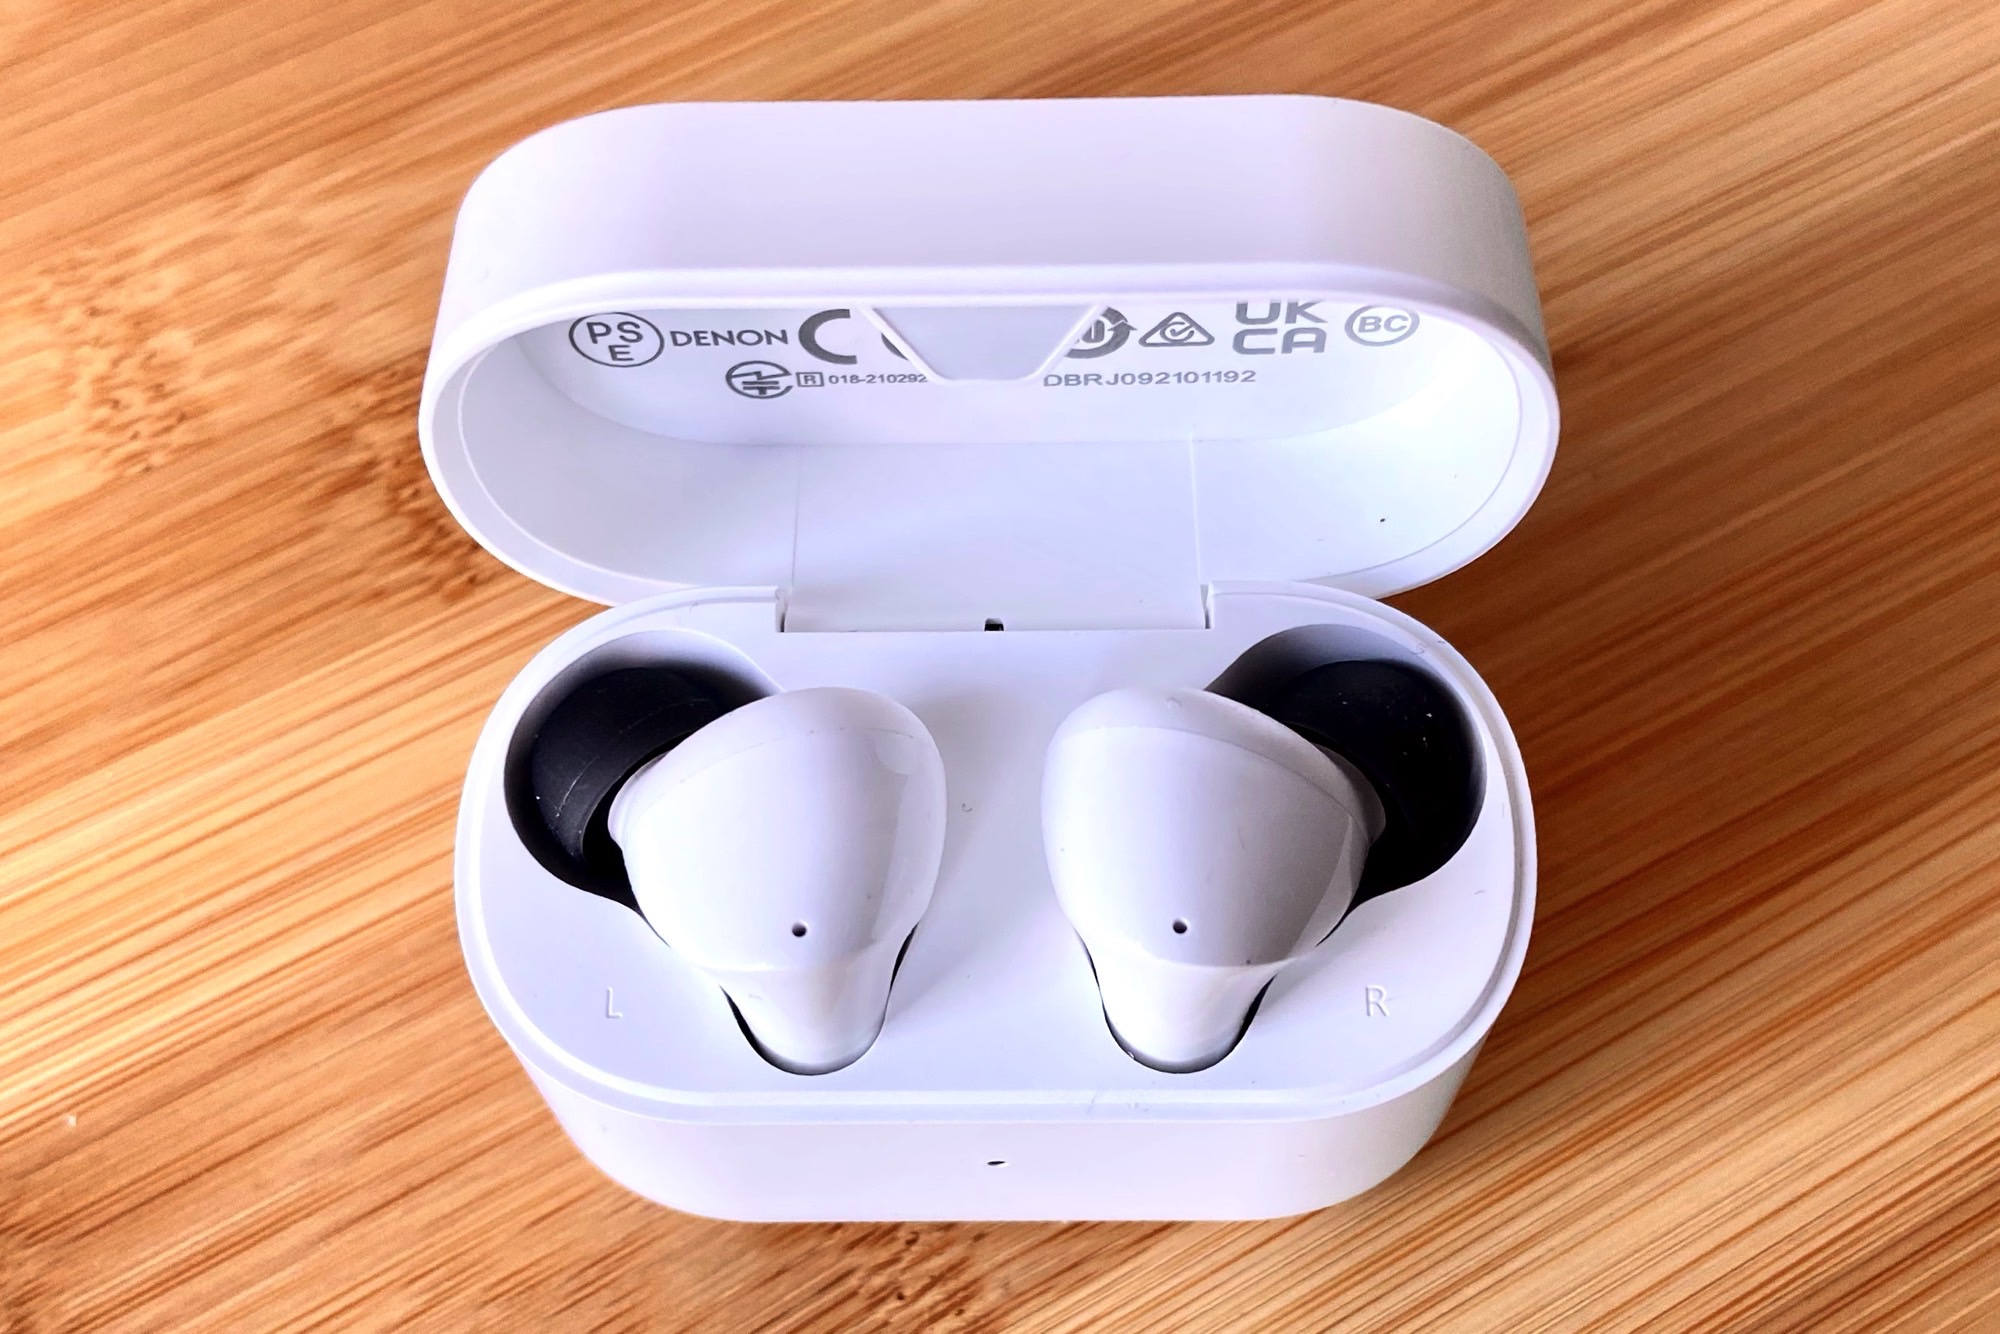 Denon Noise Cancelling Earbuds review: Serious sound value